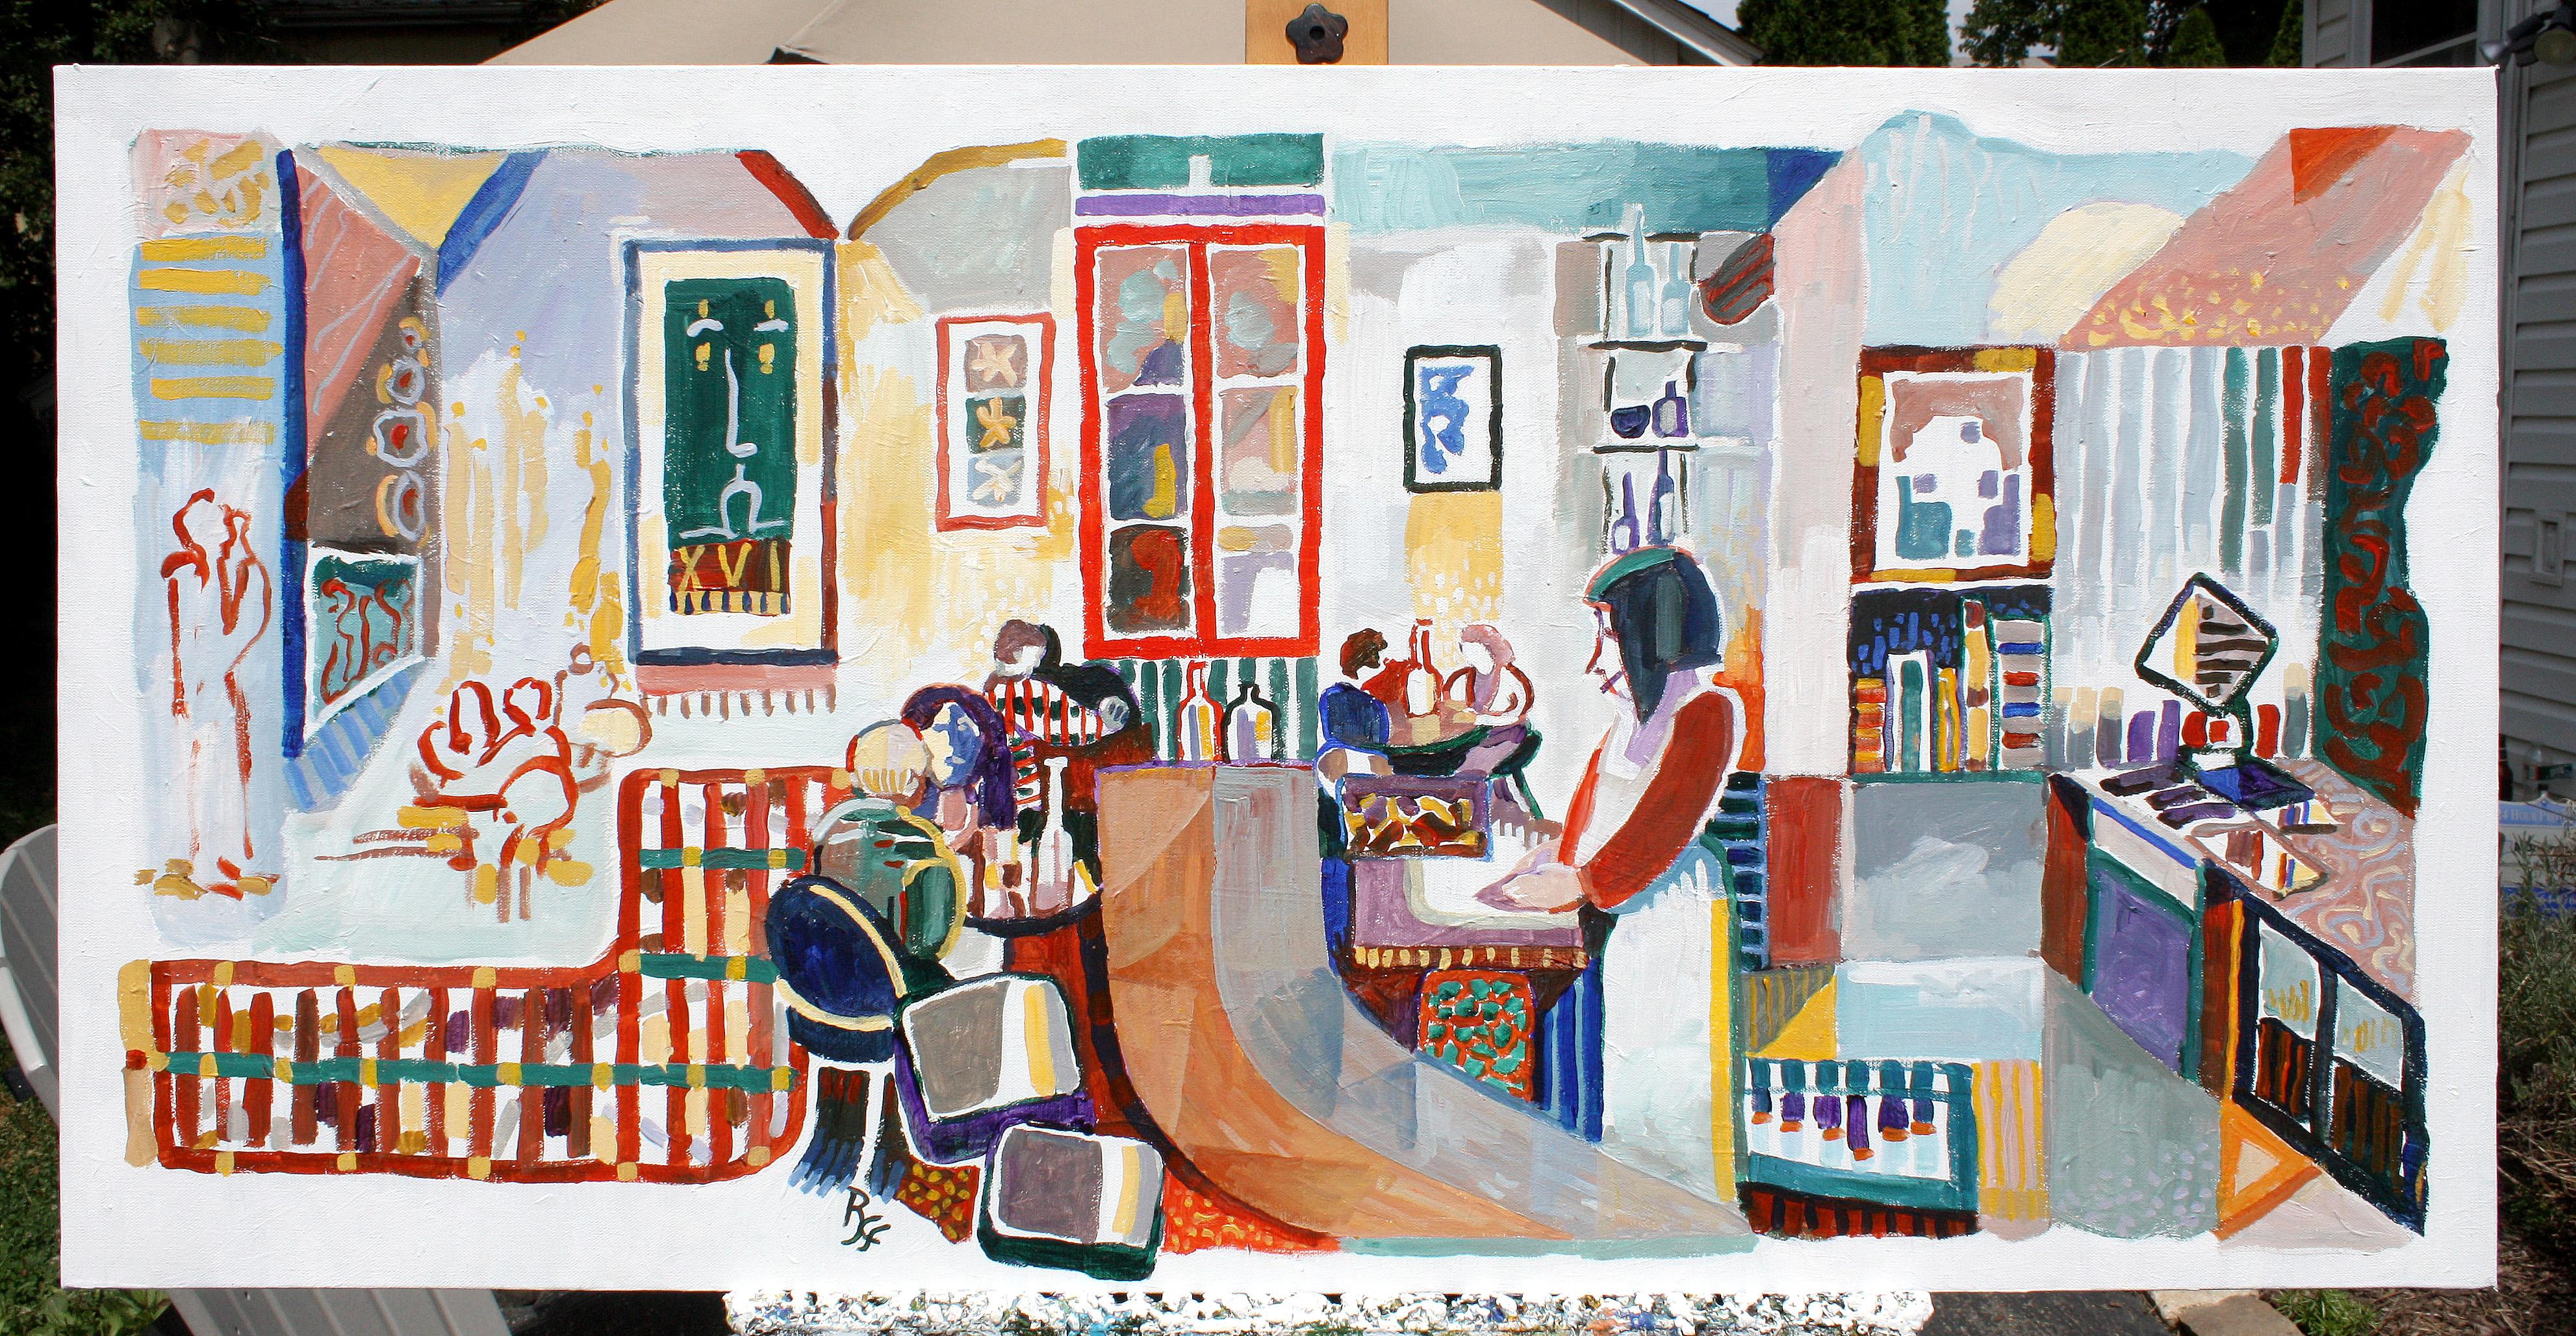 <p>Artist Comments<br>Artist Robert Hofherr highlights the interior of a trendy neighborhood bar as the subject of this expressionist piece. His stylized and conceptual work evidently uses patterns as structural representations. Robert heavily